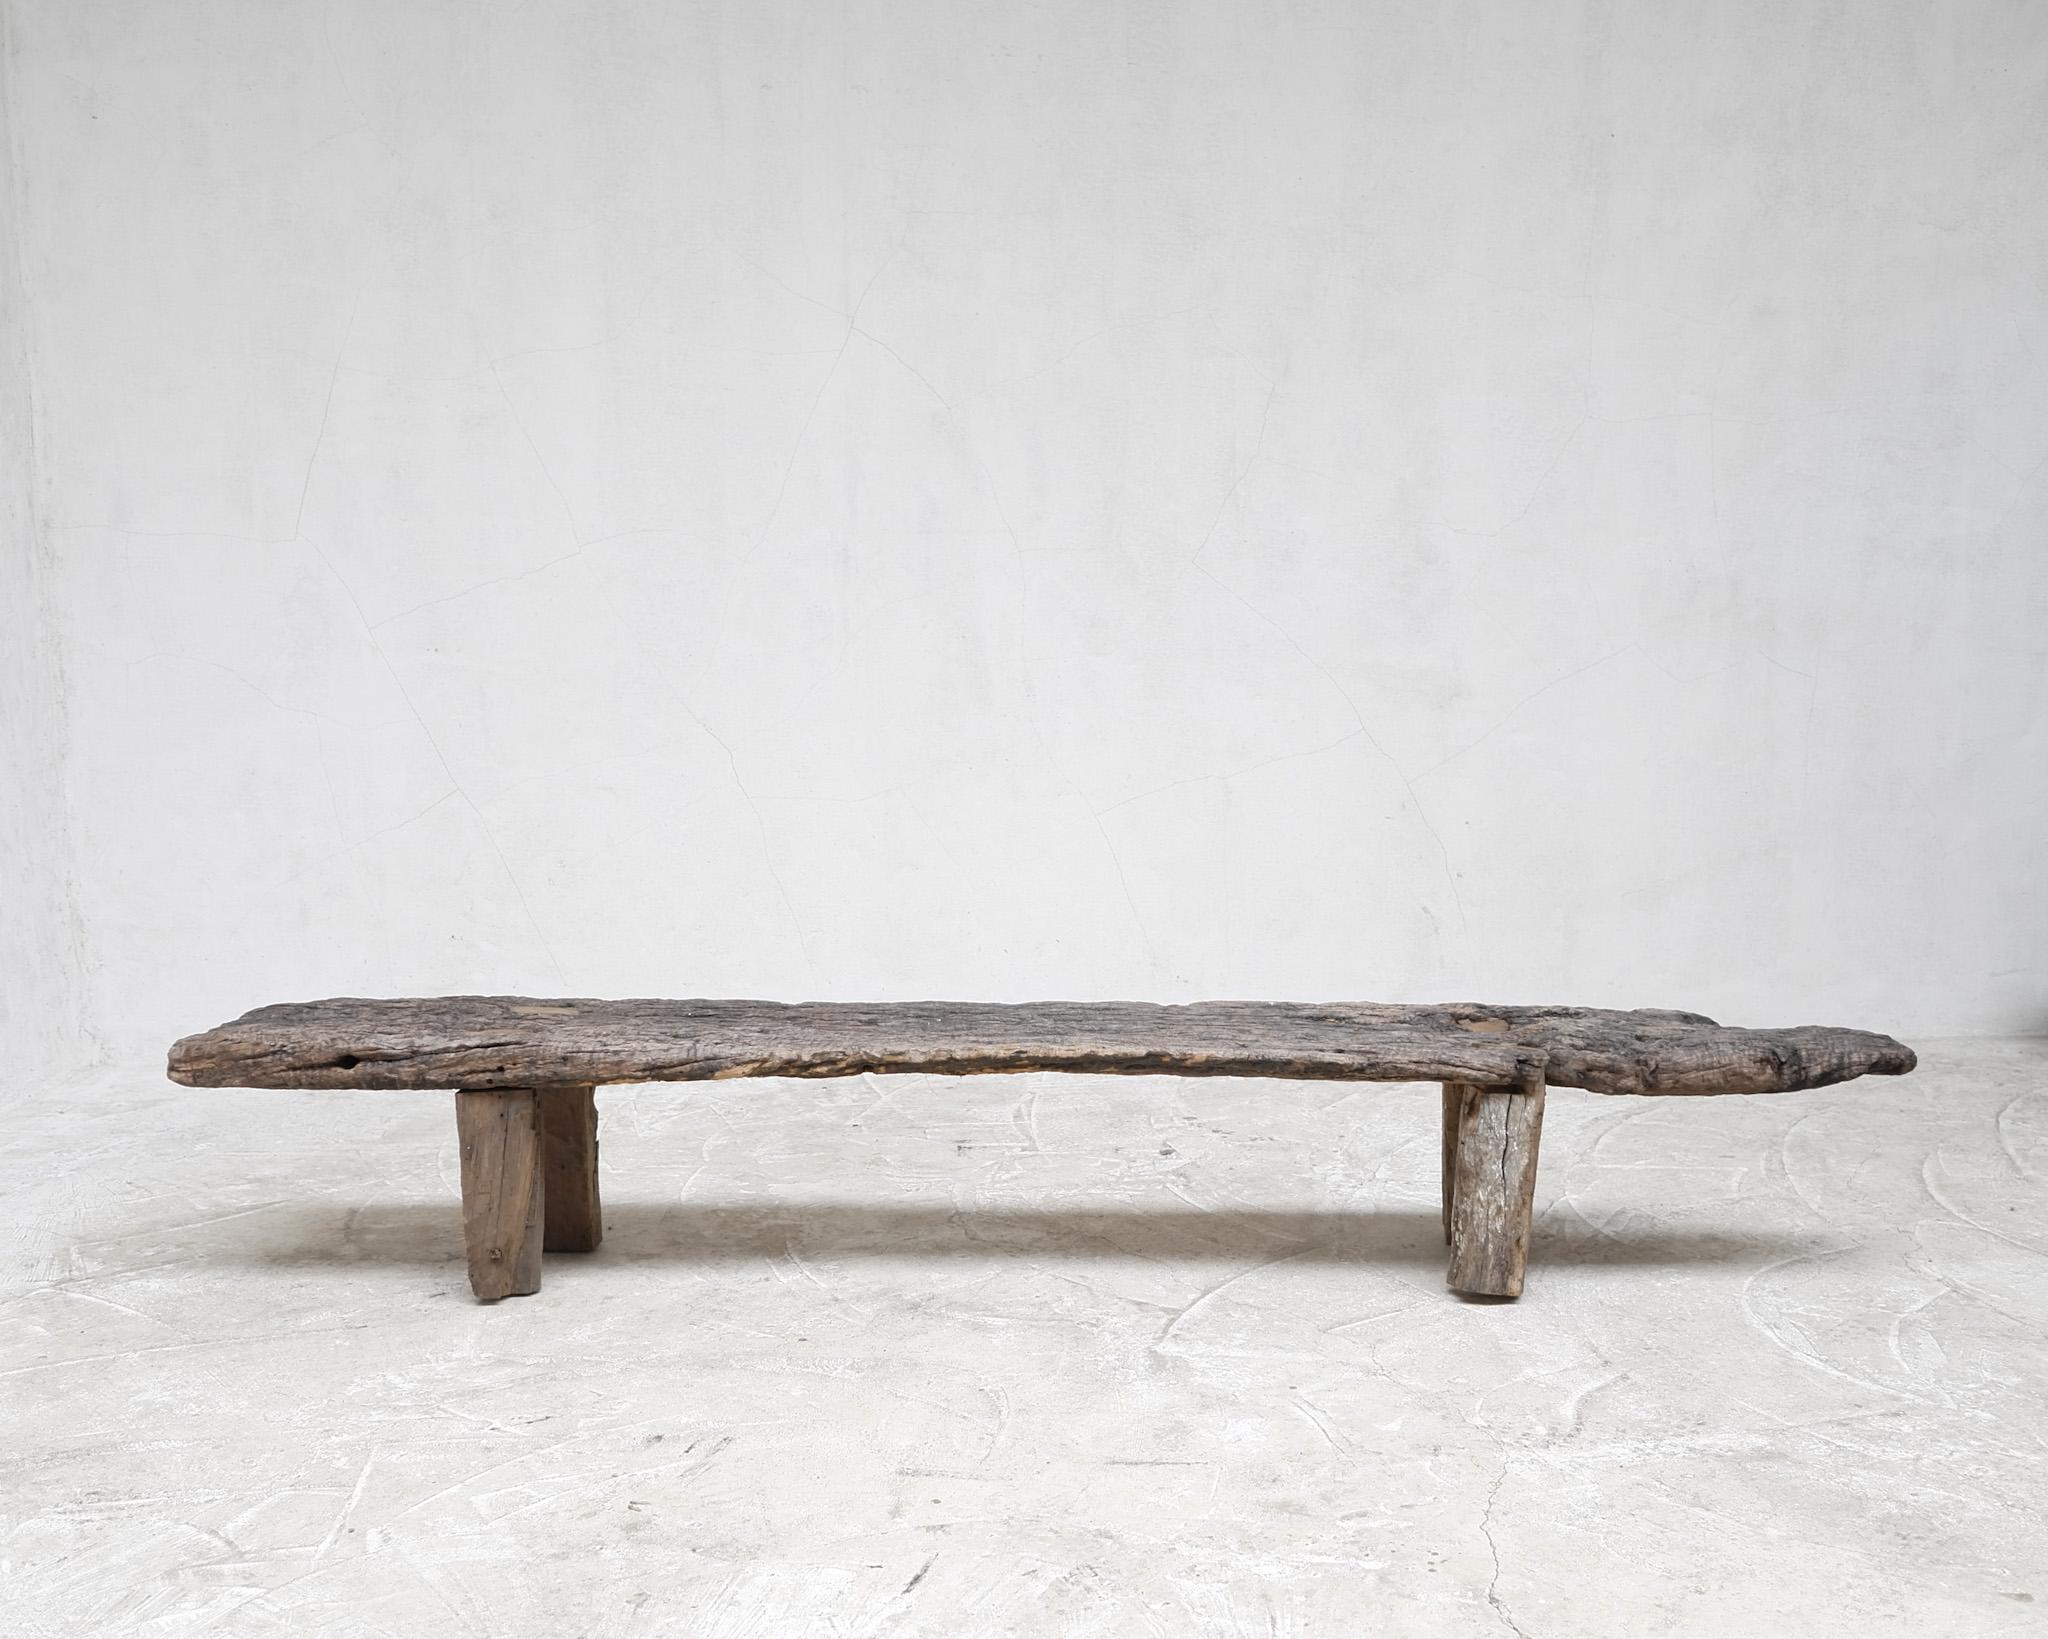 A large 19th C. Portuguese bench in the countries native cork wood.

Gnarled bleached out surface on four chunky walnut legs.

-

We offer free shipping to the USA/Canada through Fedex with this item.